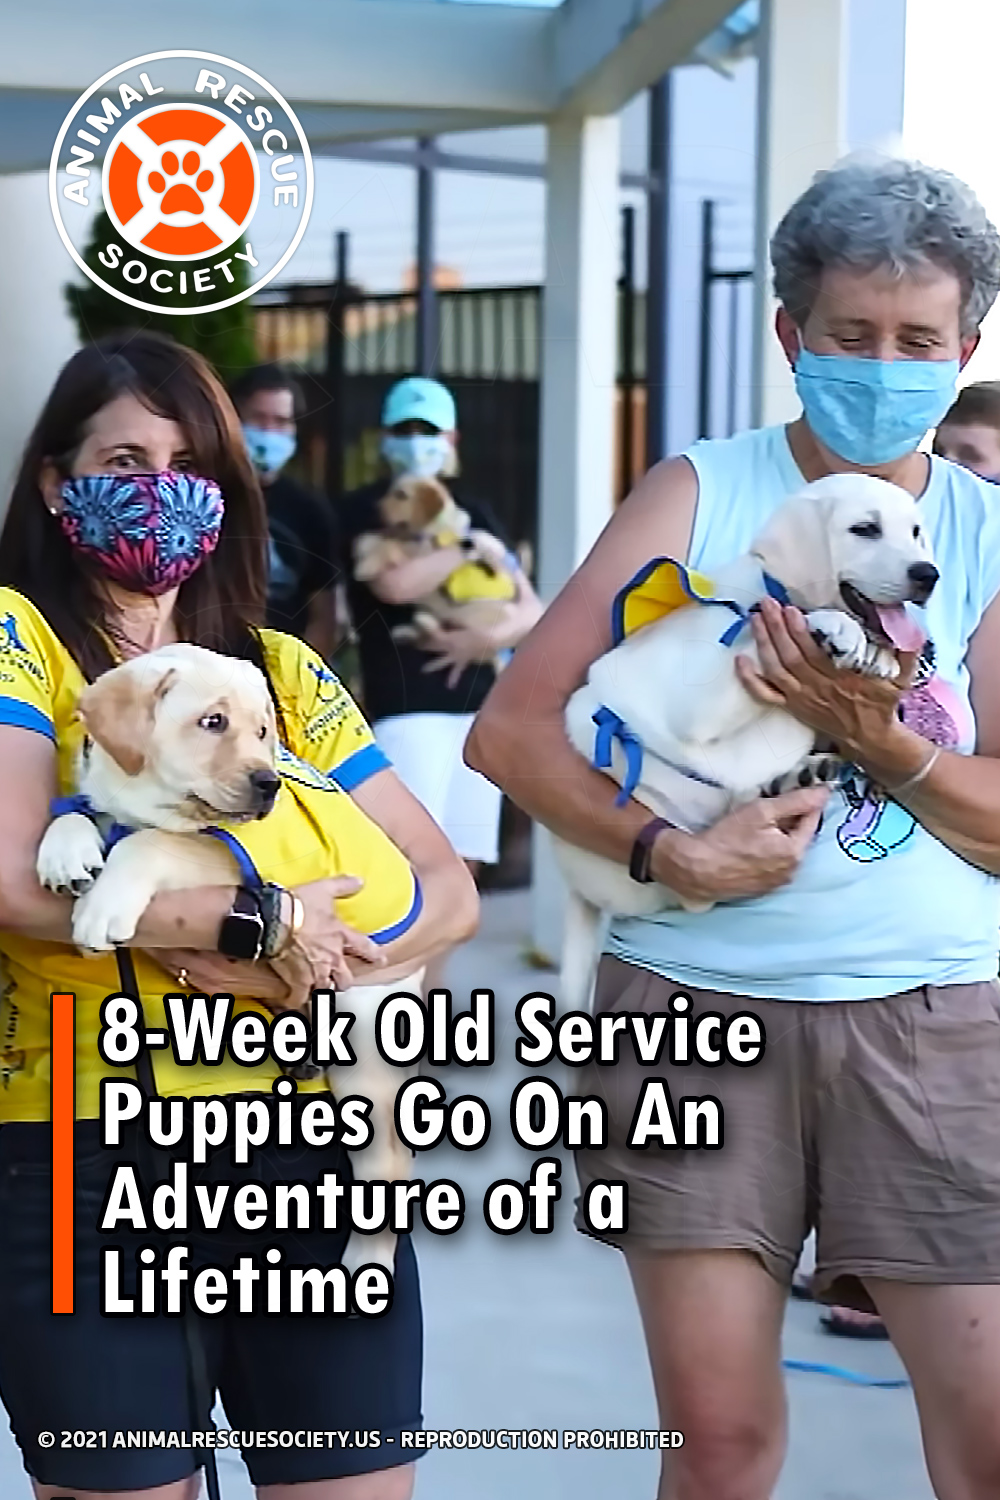 8-Week Old Service Puppies Go On An Adventure of a Lifetime